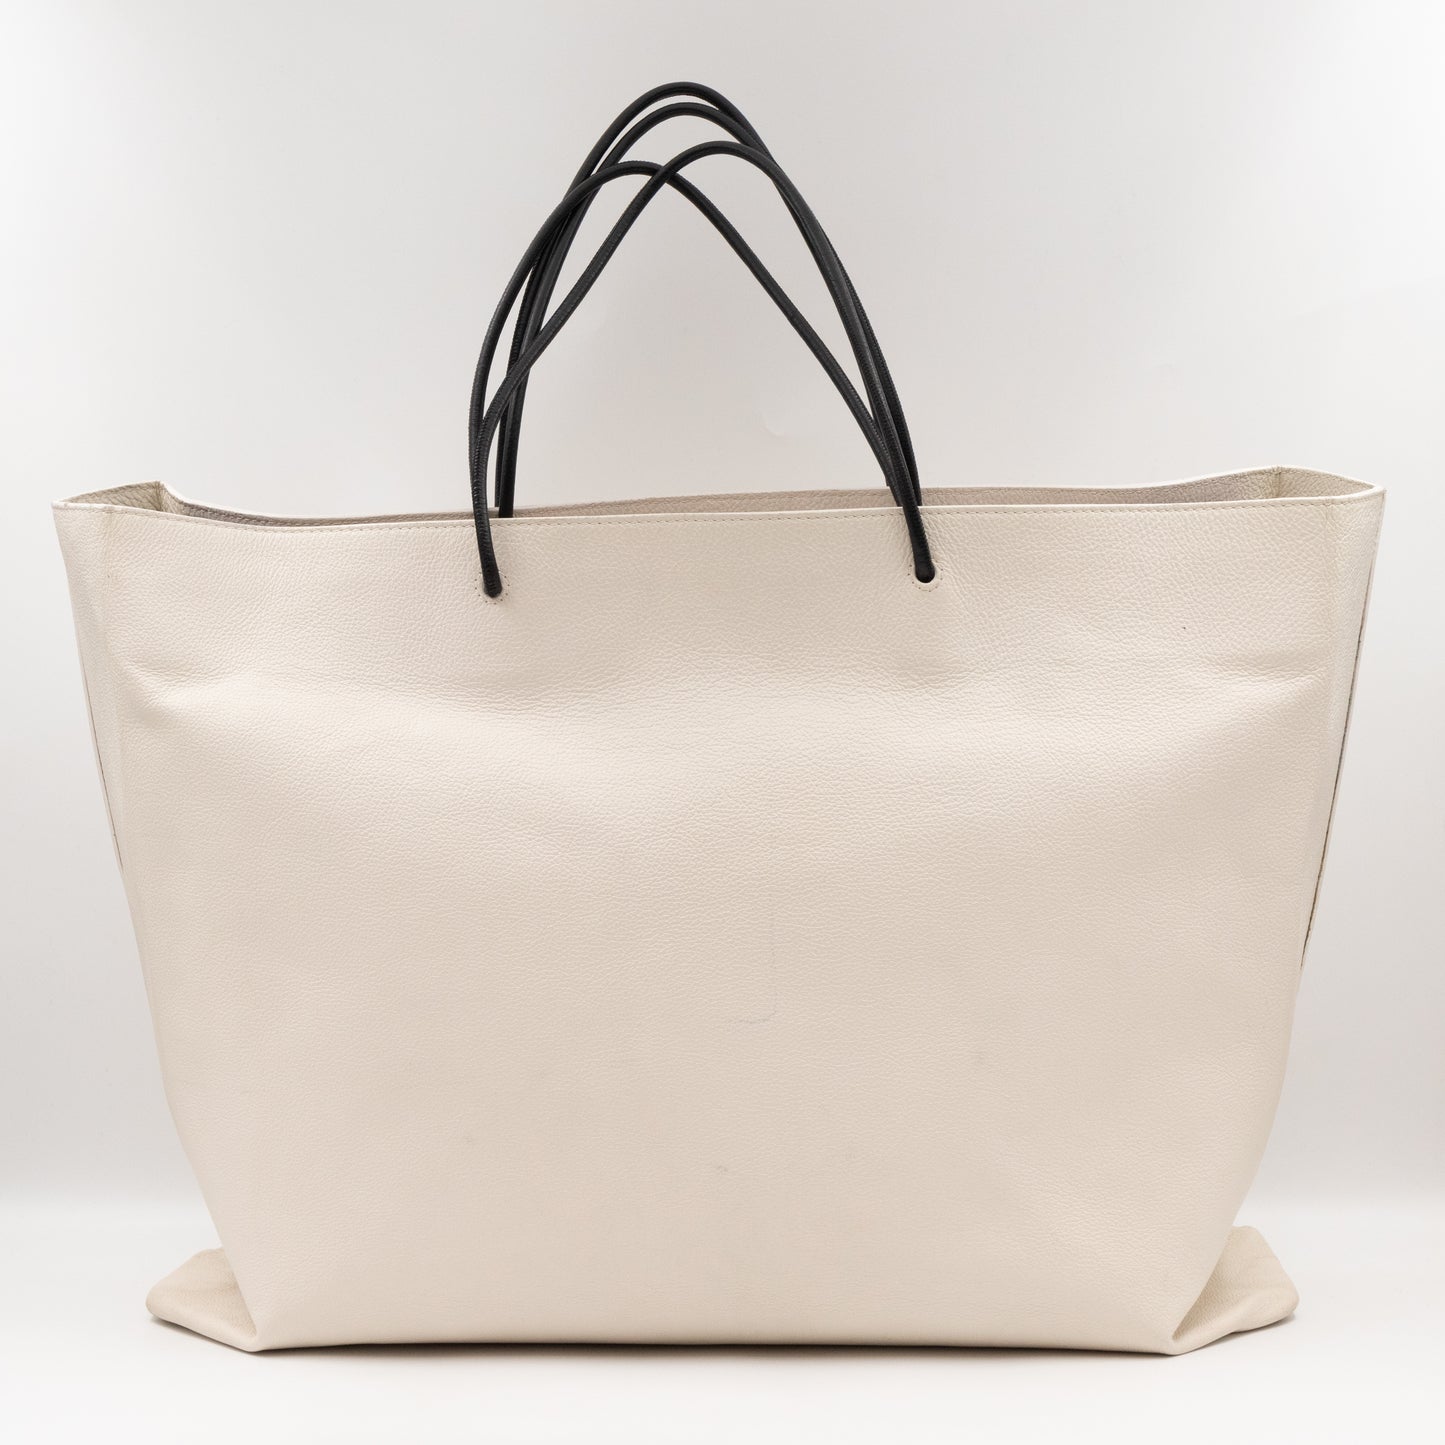 East West Shopper North South Tote Bag White Leather